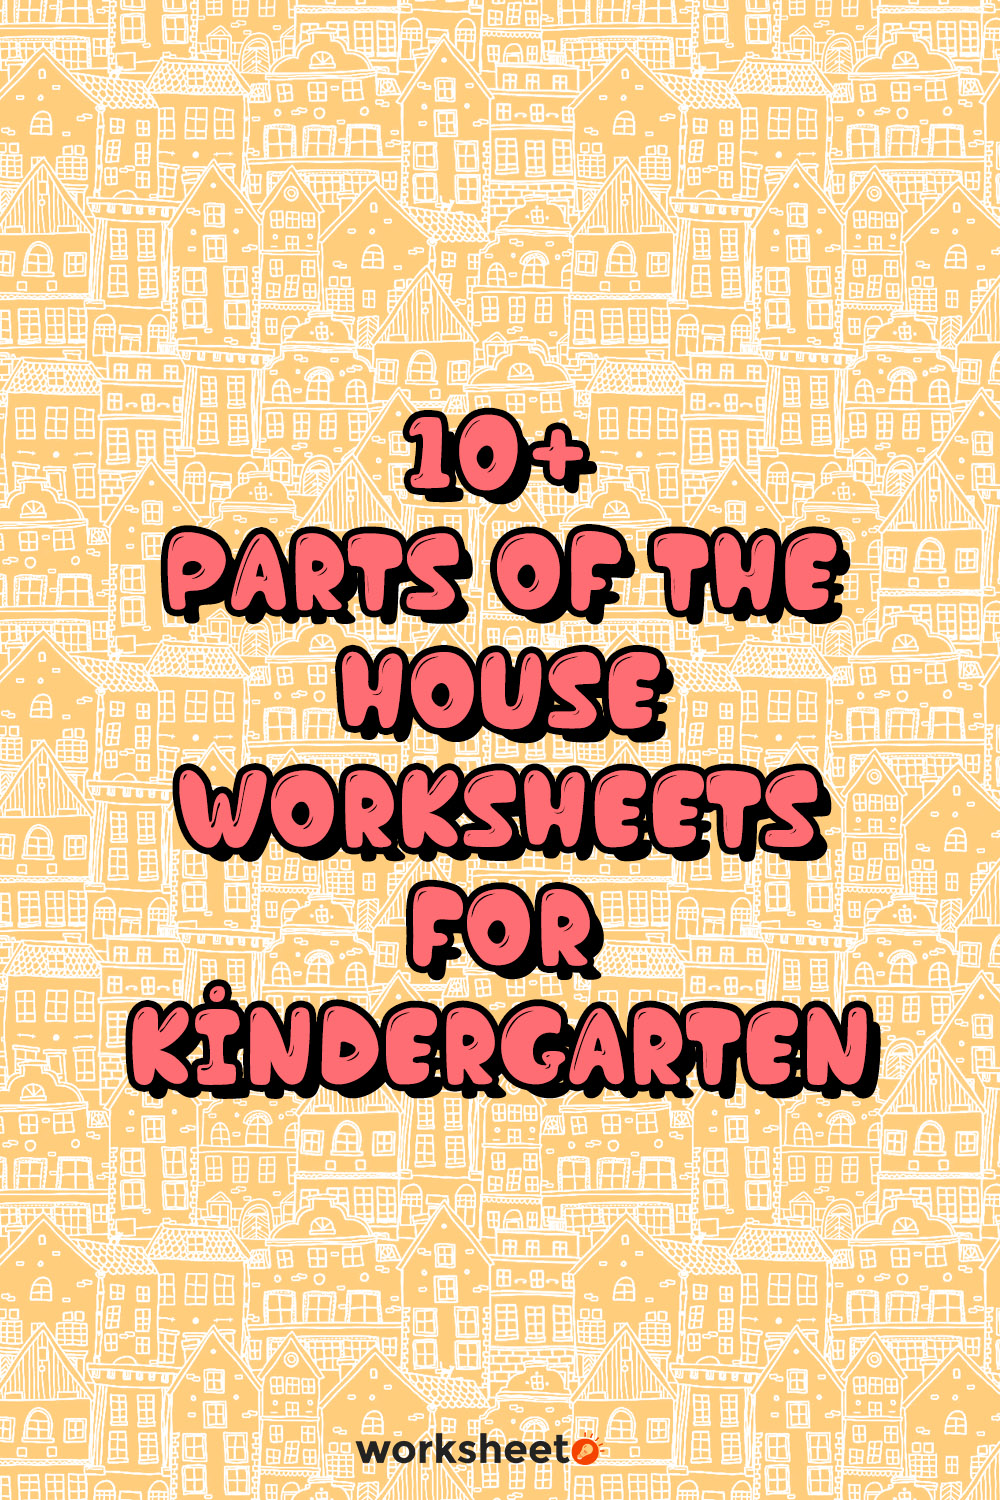 Parts of the House Worksheets for Kindergarten